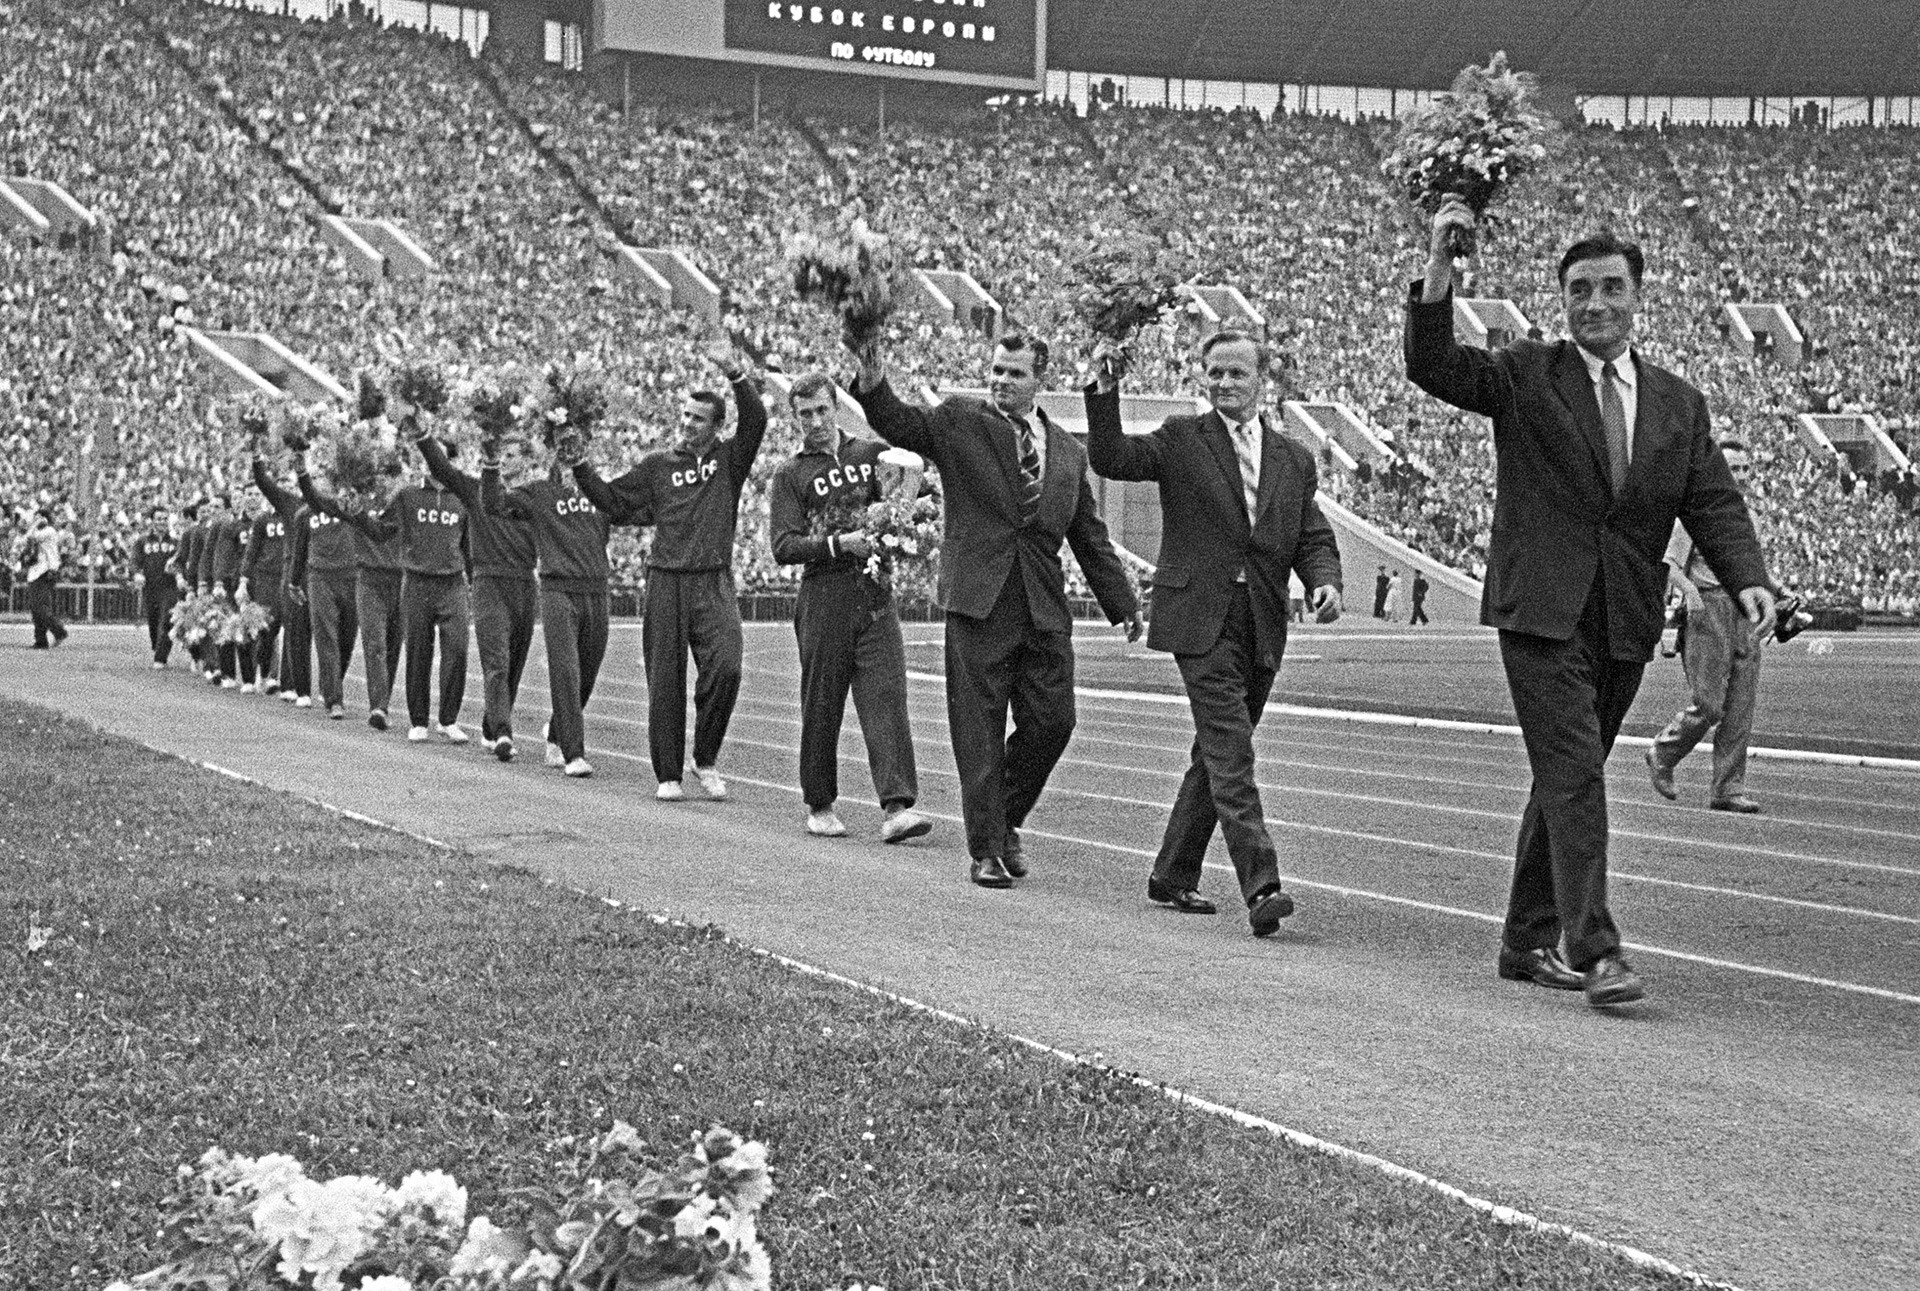 The Soviet national football team reigned supreme following the 1960 European Cup for the first time in its history.